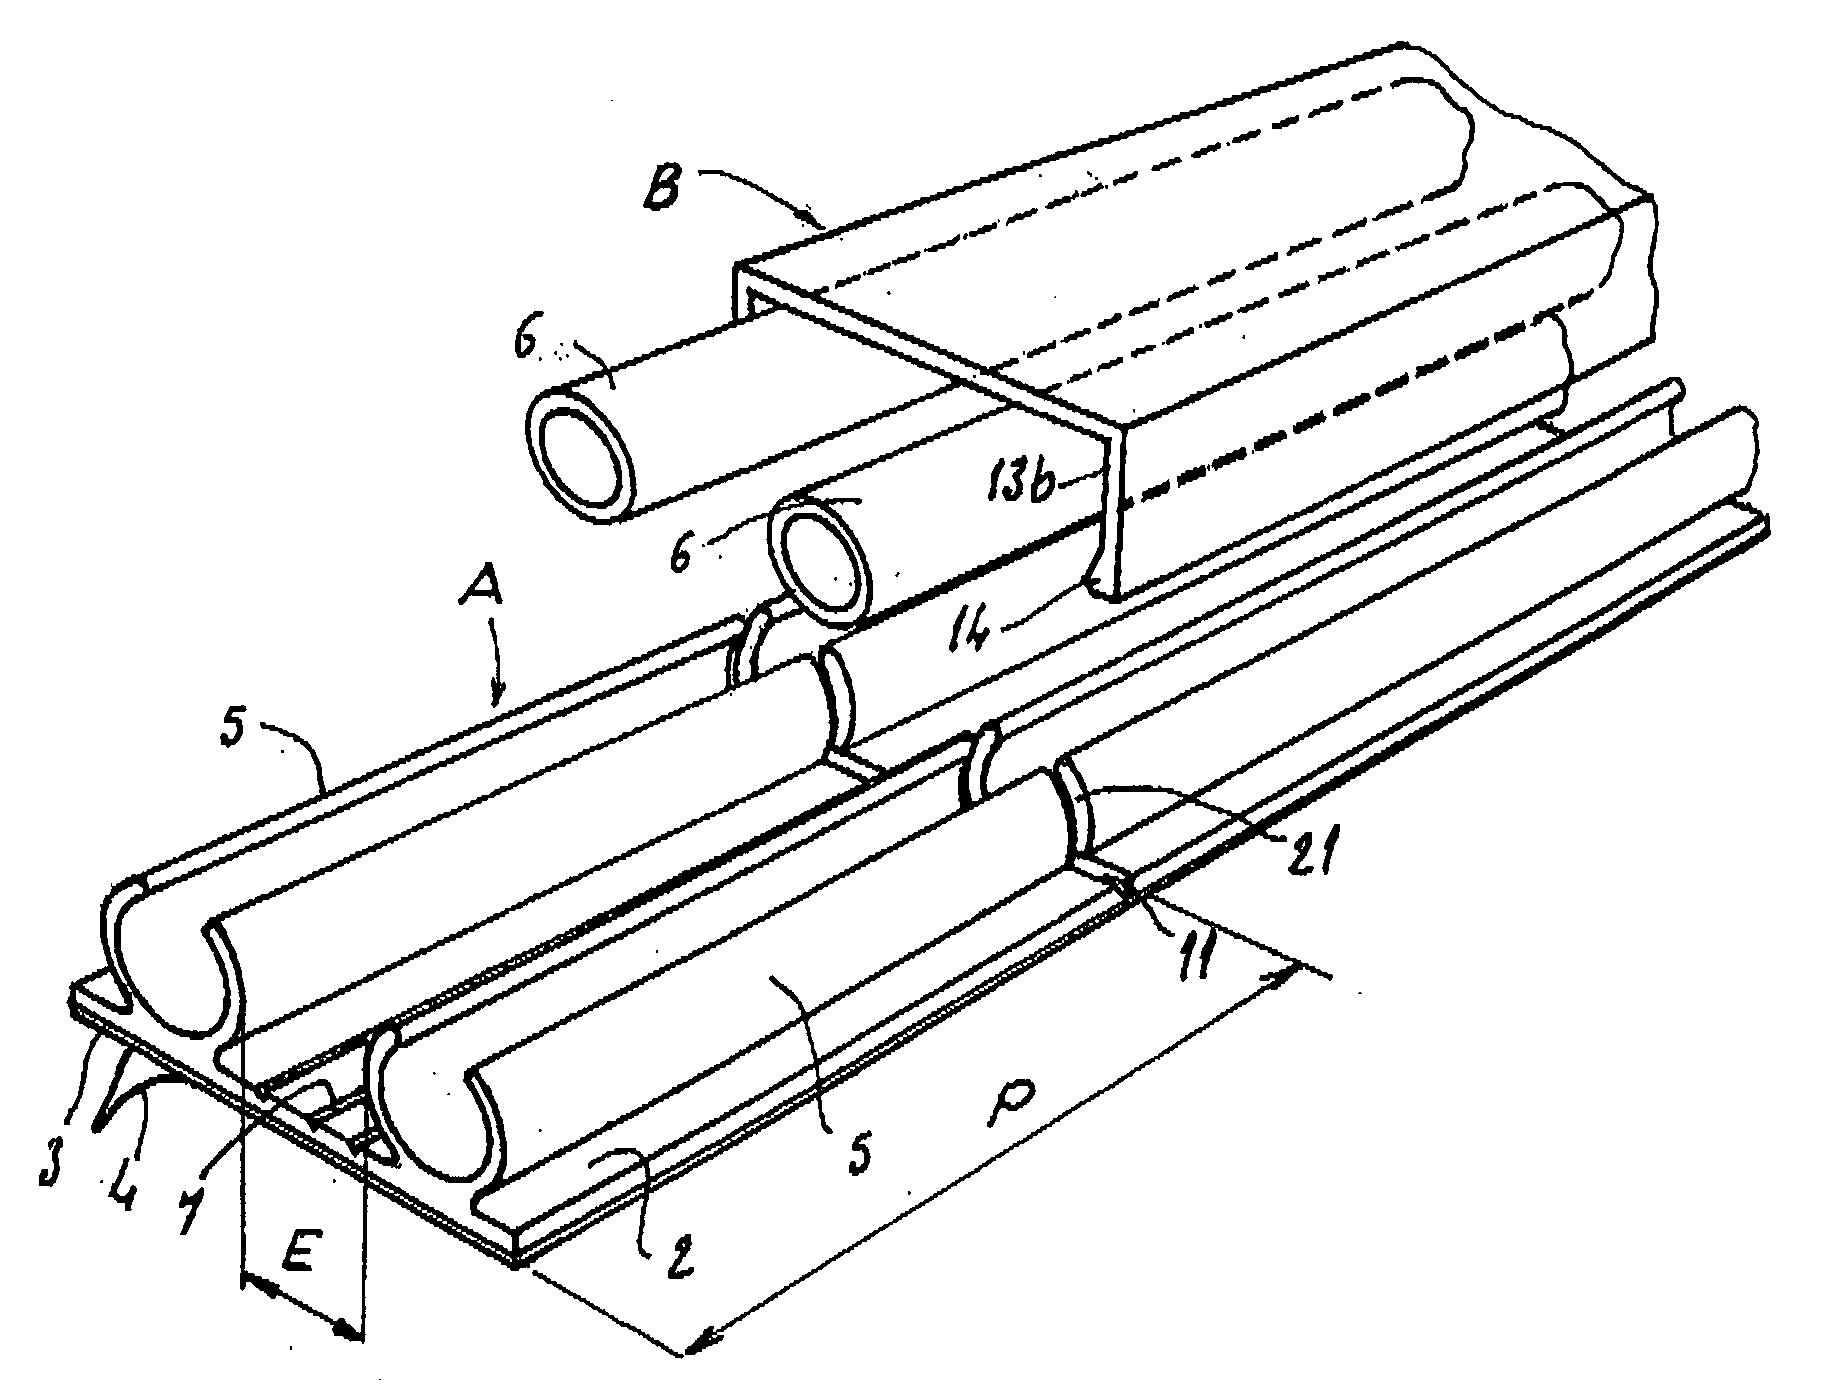 Device for laying and fixing pipes for various circuits, domestic or industrial